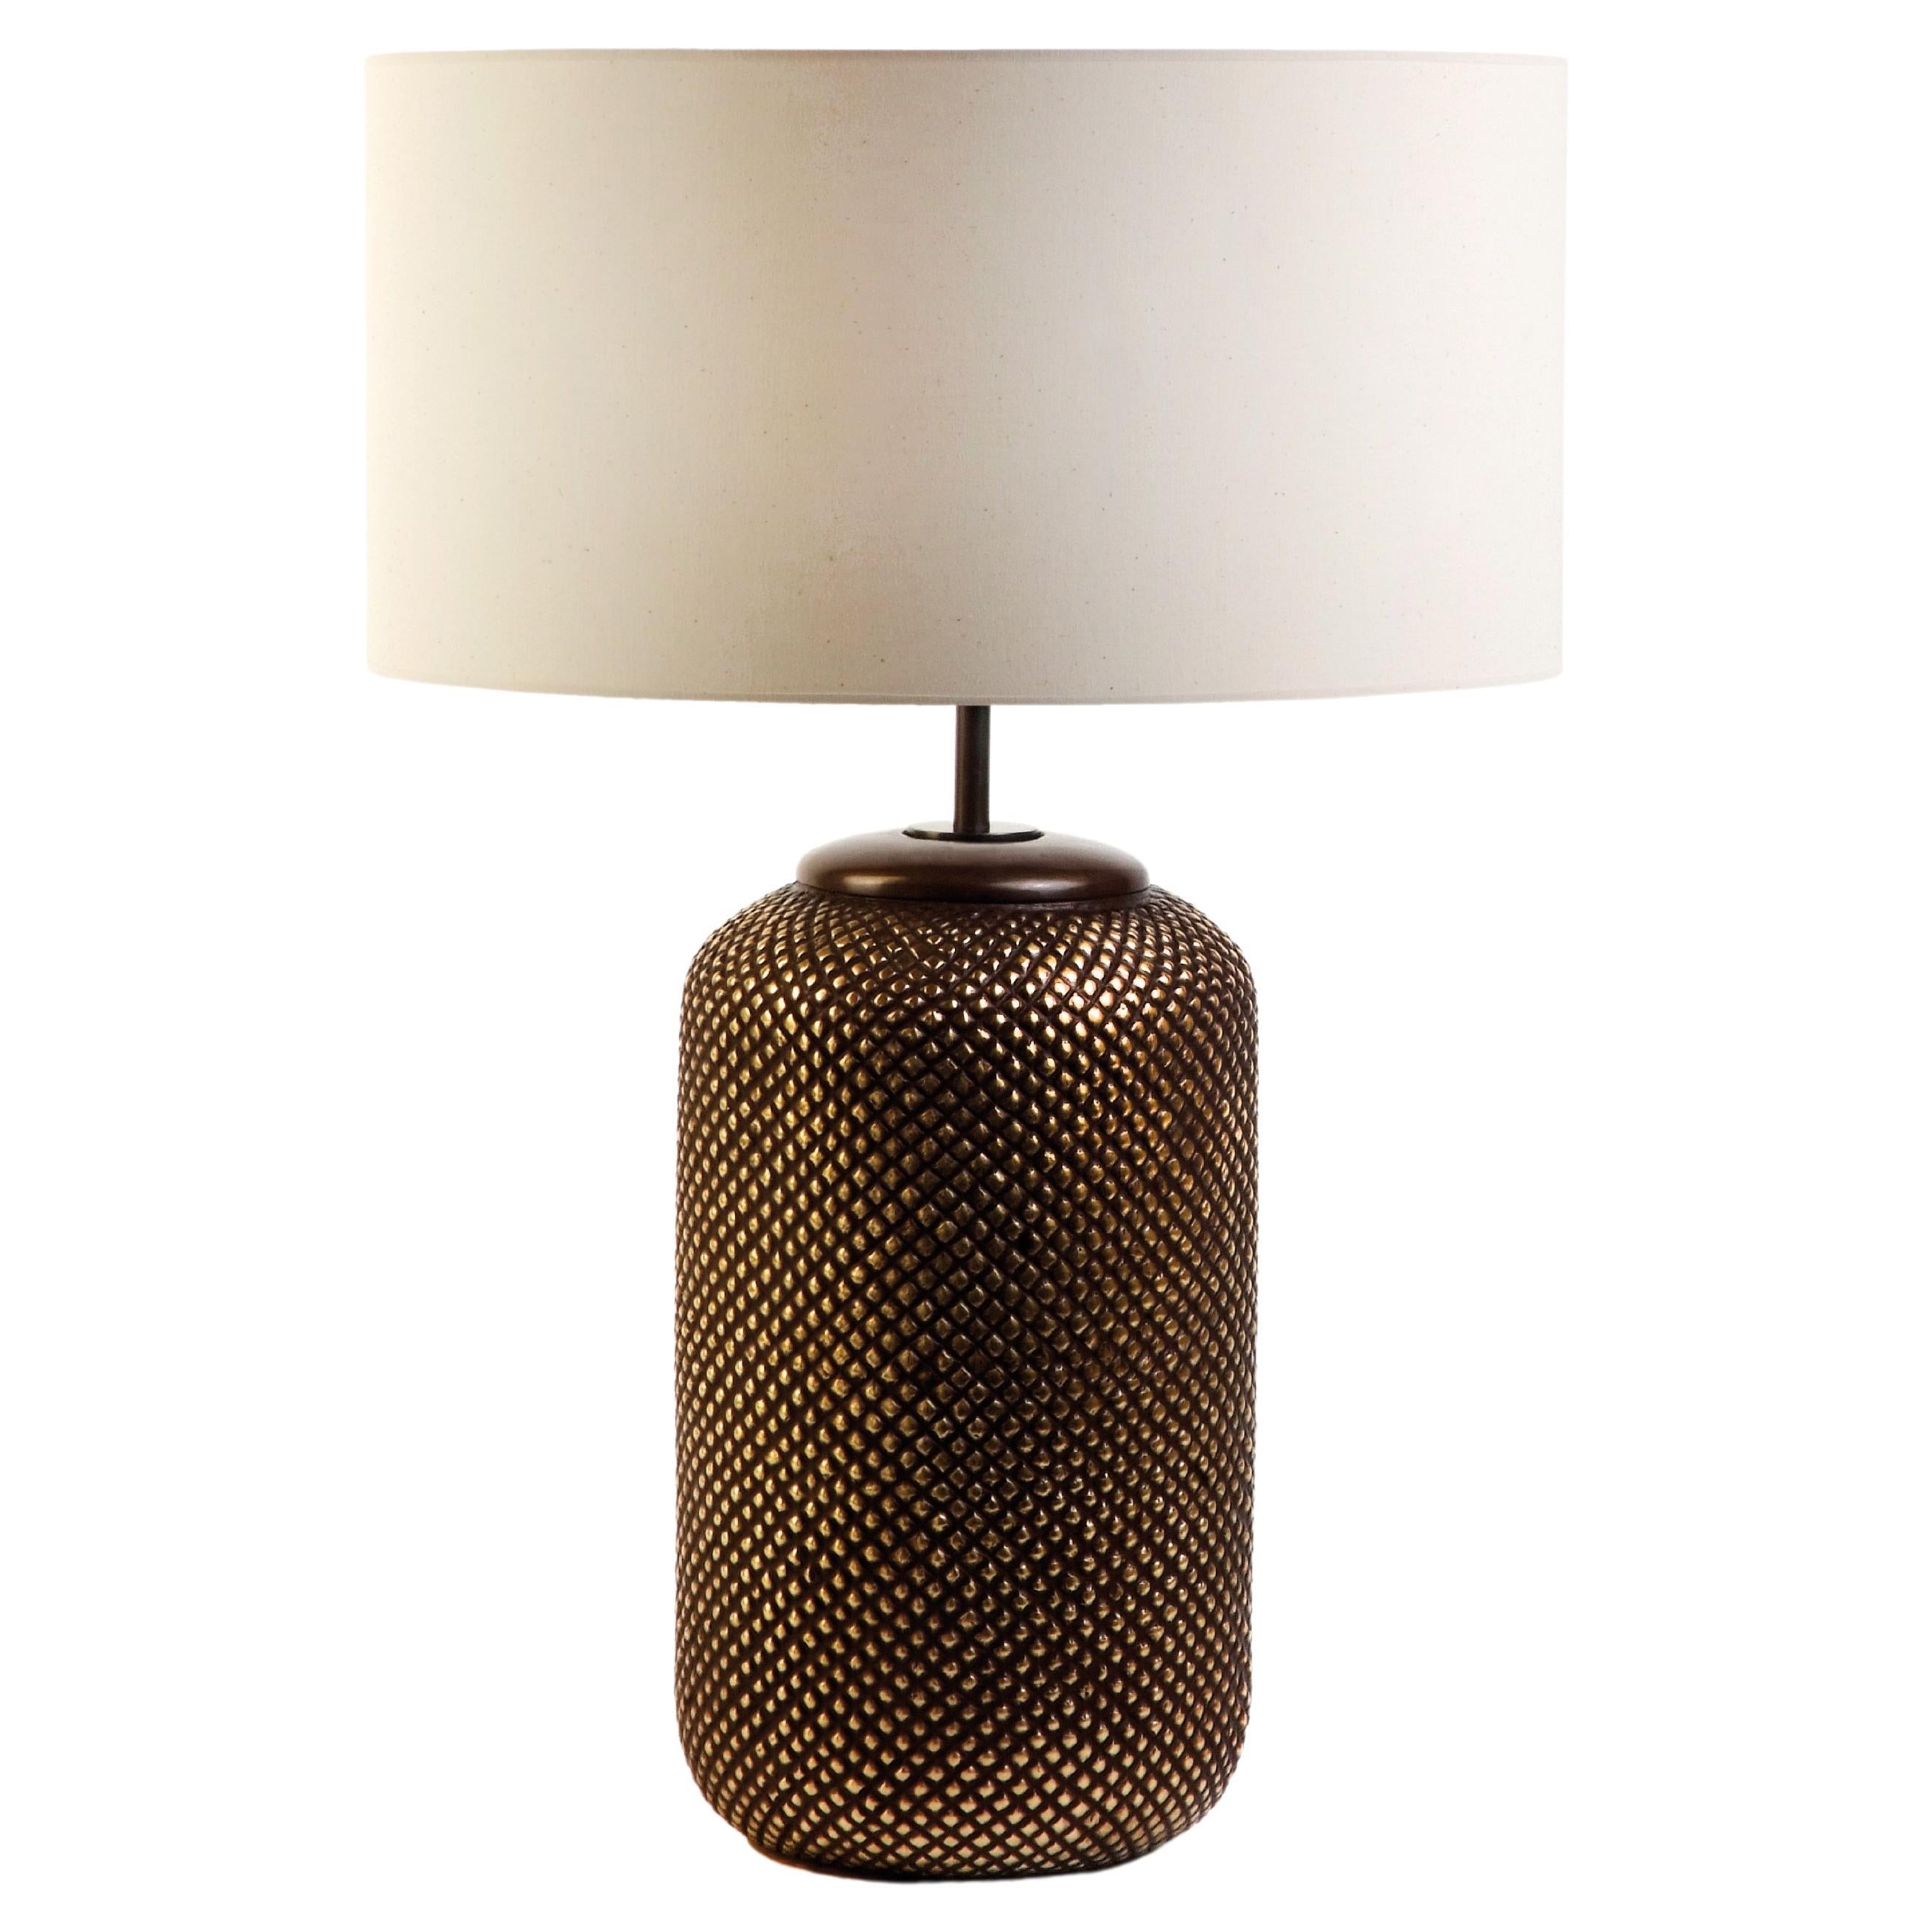 Table Lamp in Aged Brass, Modern Art Deco Design Handmade. Shade included For Sale